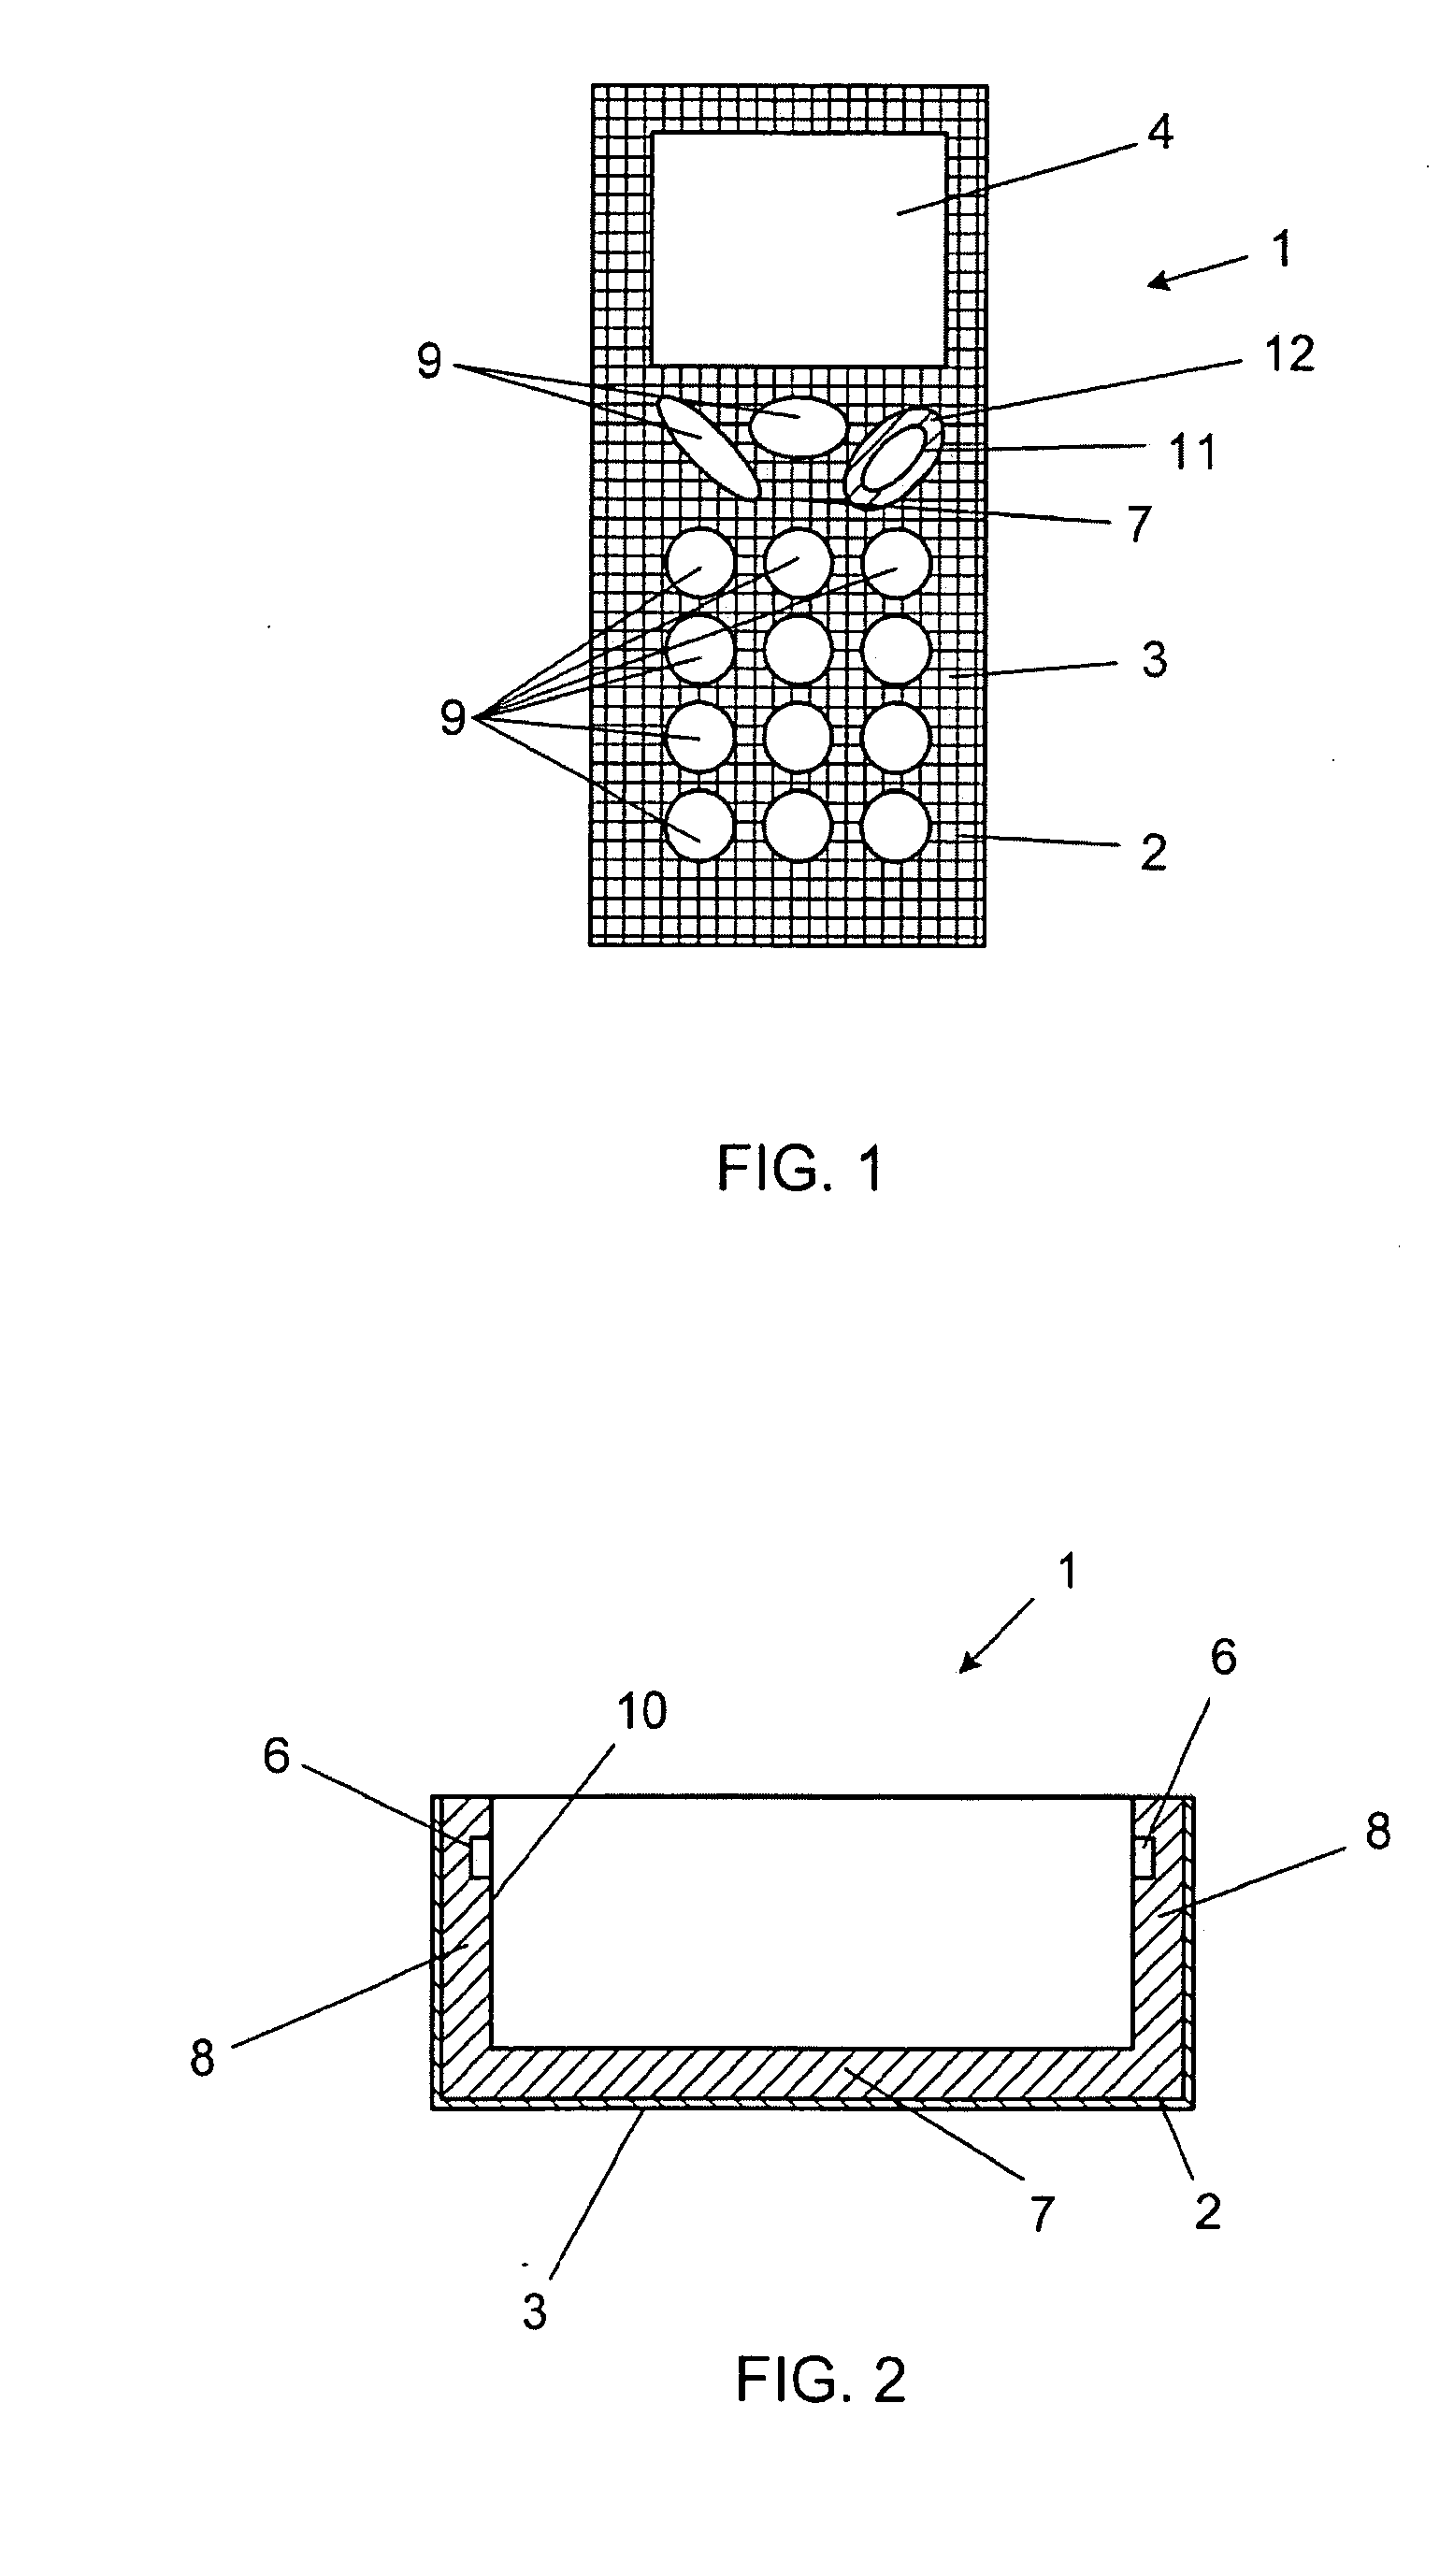 Cover, mobile communications apparatus and method for producing a coated cover